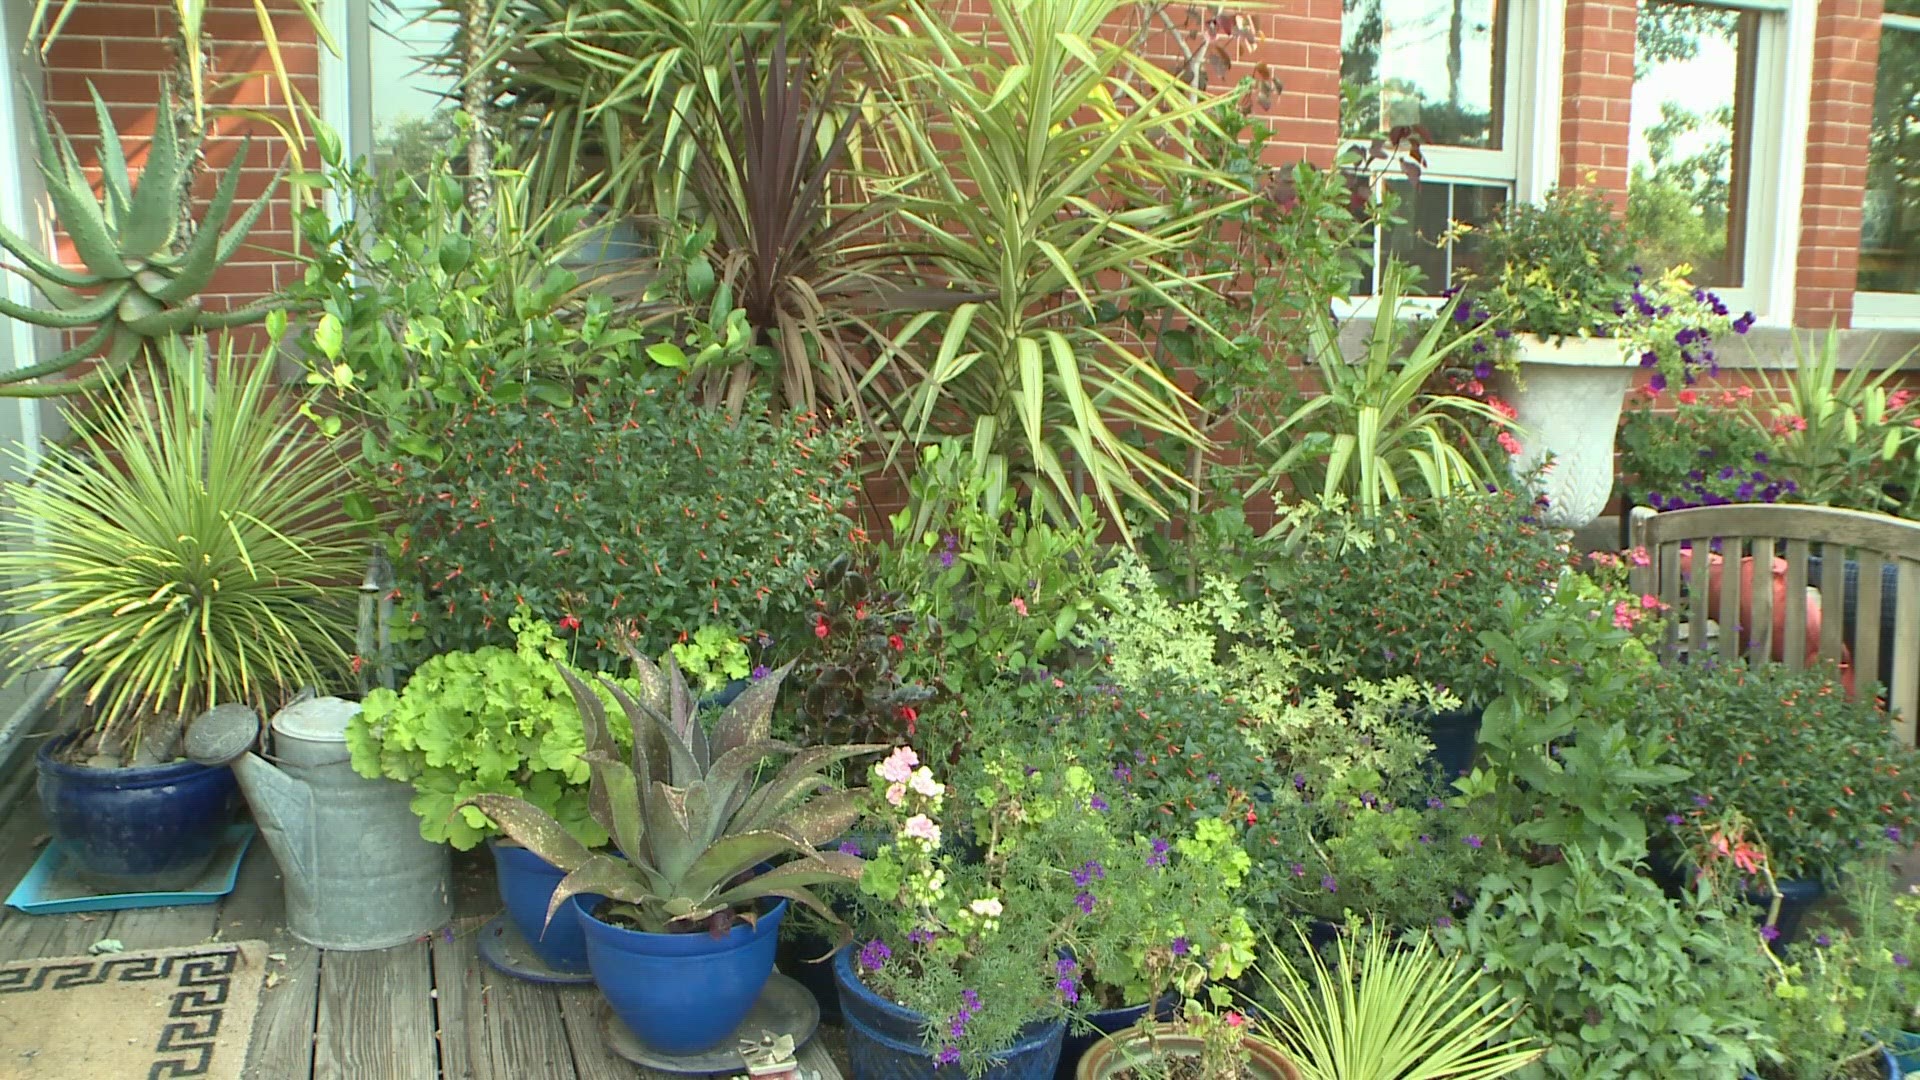 Growing plants in containers opens up possibilities for nearly everyone. You can try new plants that perhaps wouldn't thrive in your soil.